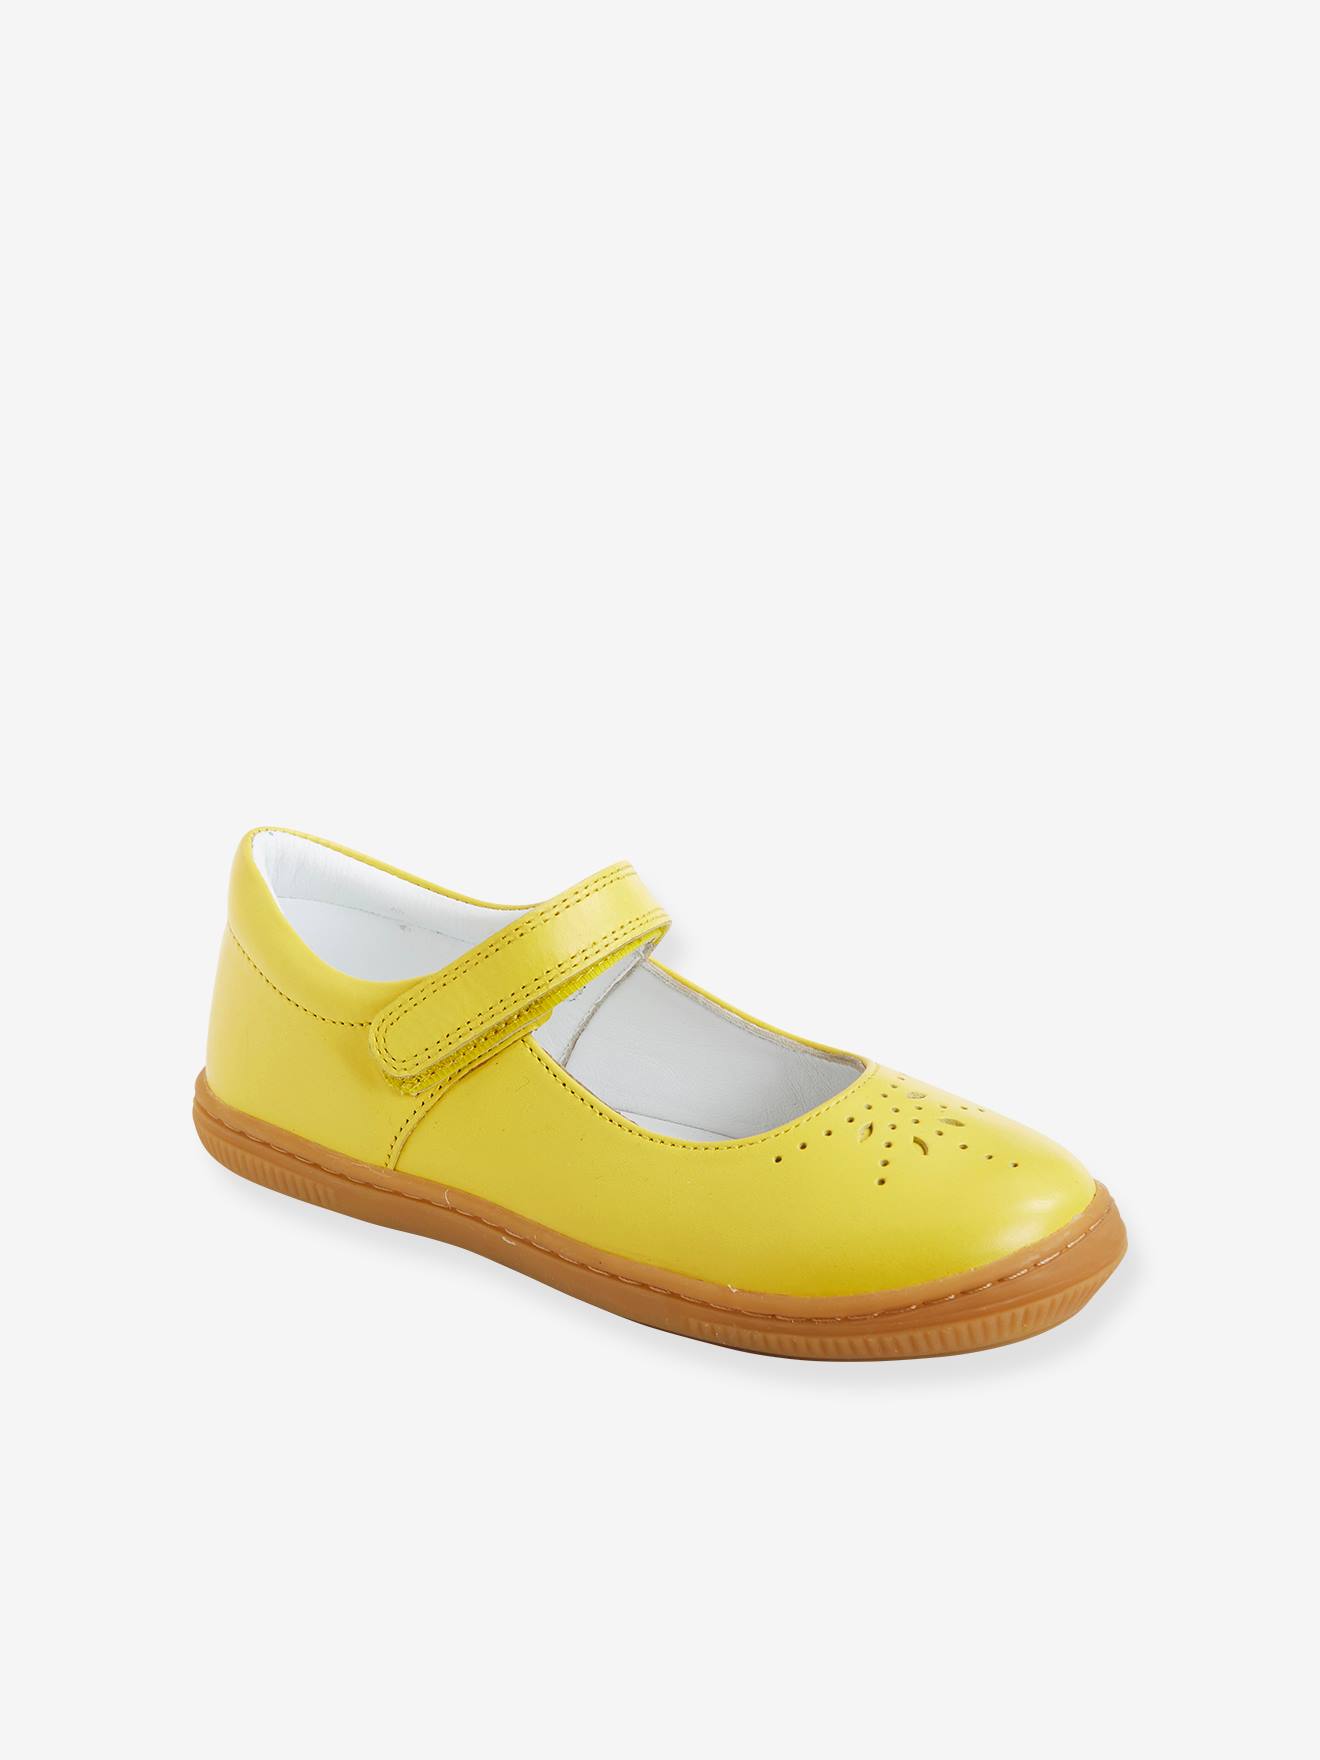 Babies cuir fille collection maternelle jaune